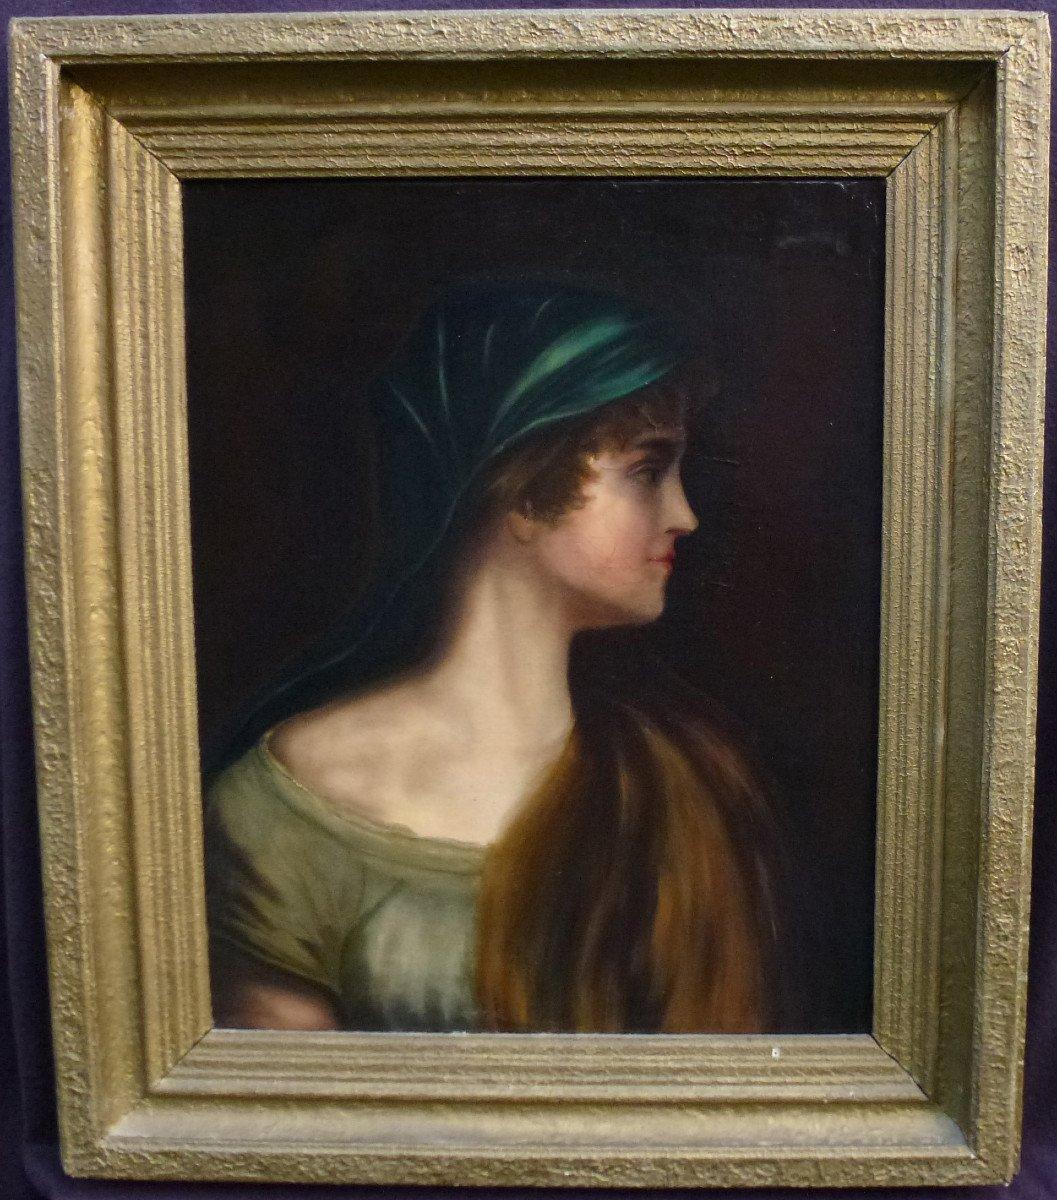 Portrait of a Woman, Original Antique Oil on Canvas, French school - Painting by Unknown